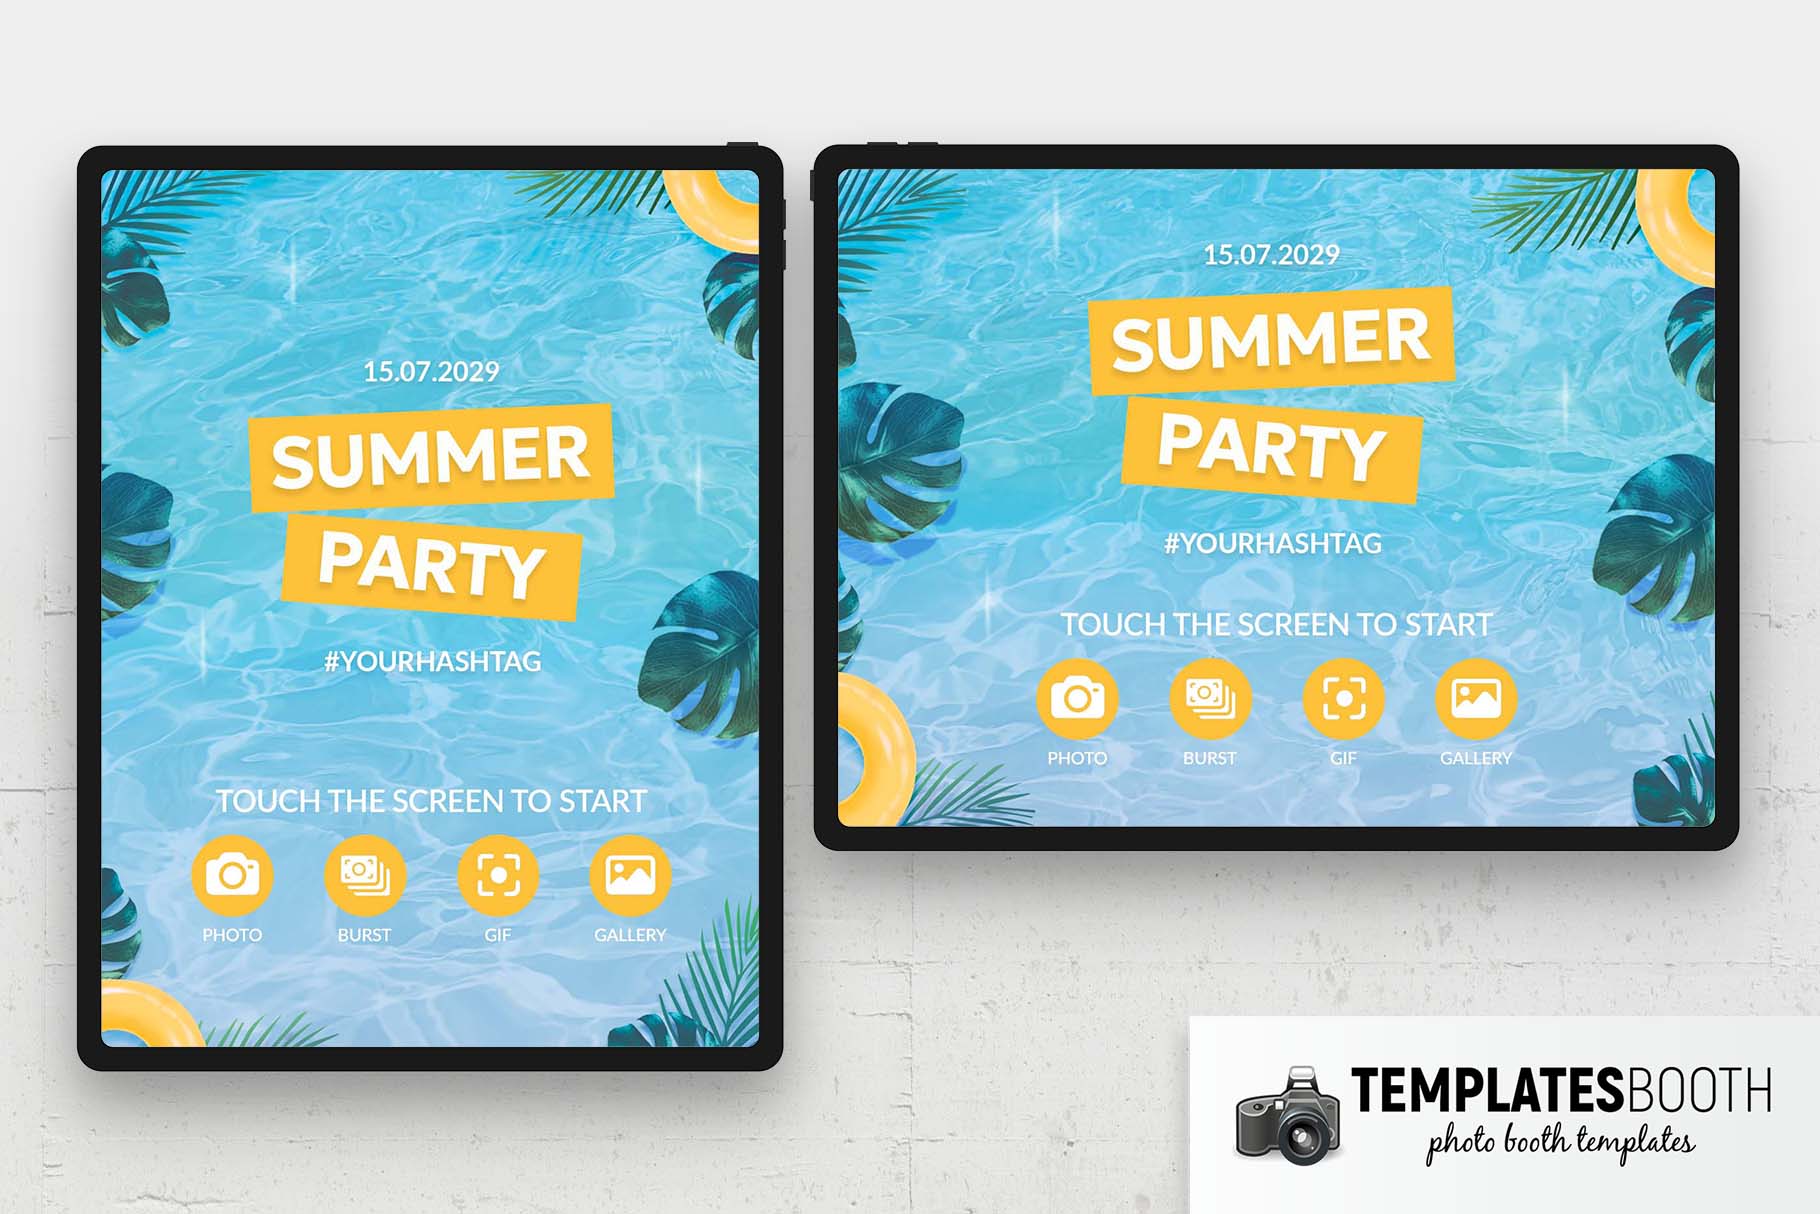 Summer Pool Party Photo Booth Welcome Screen